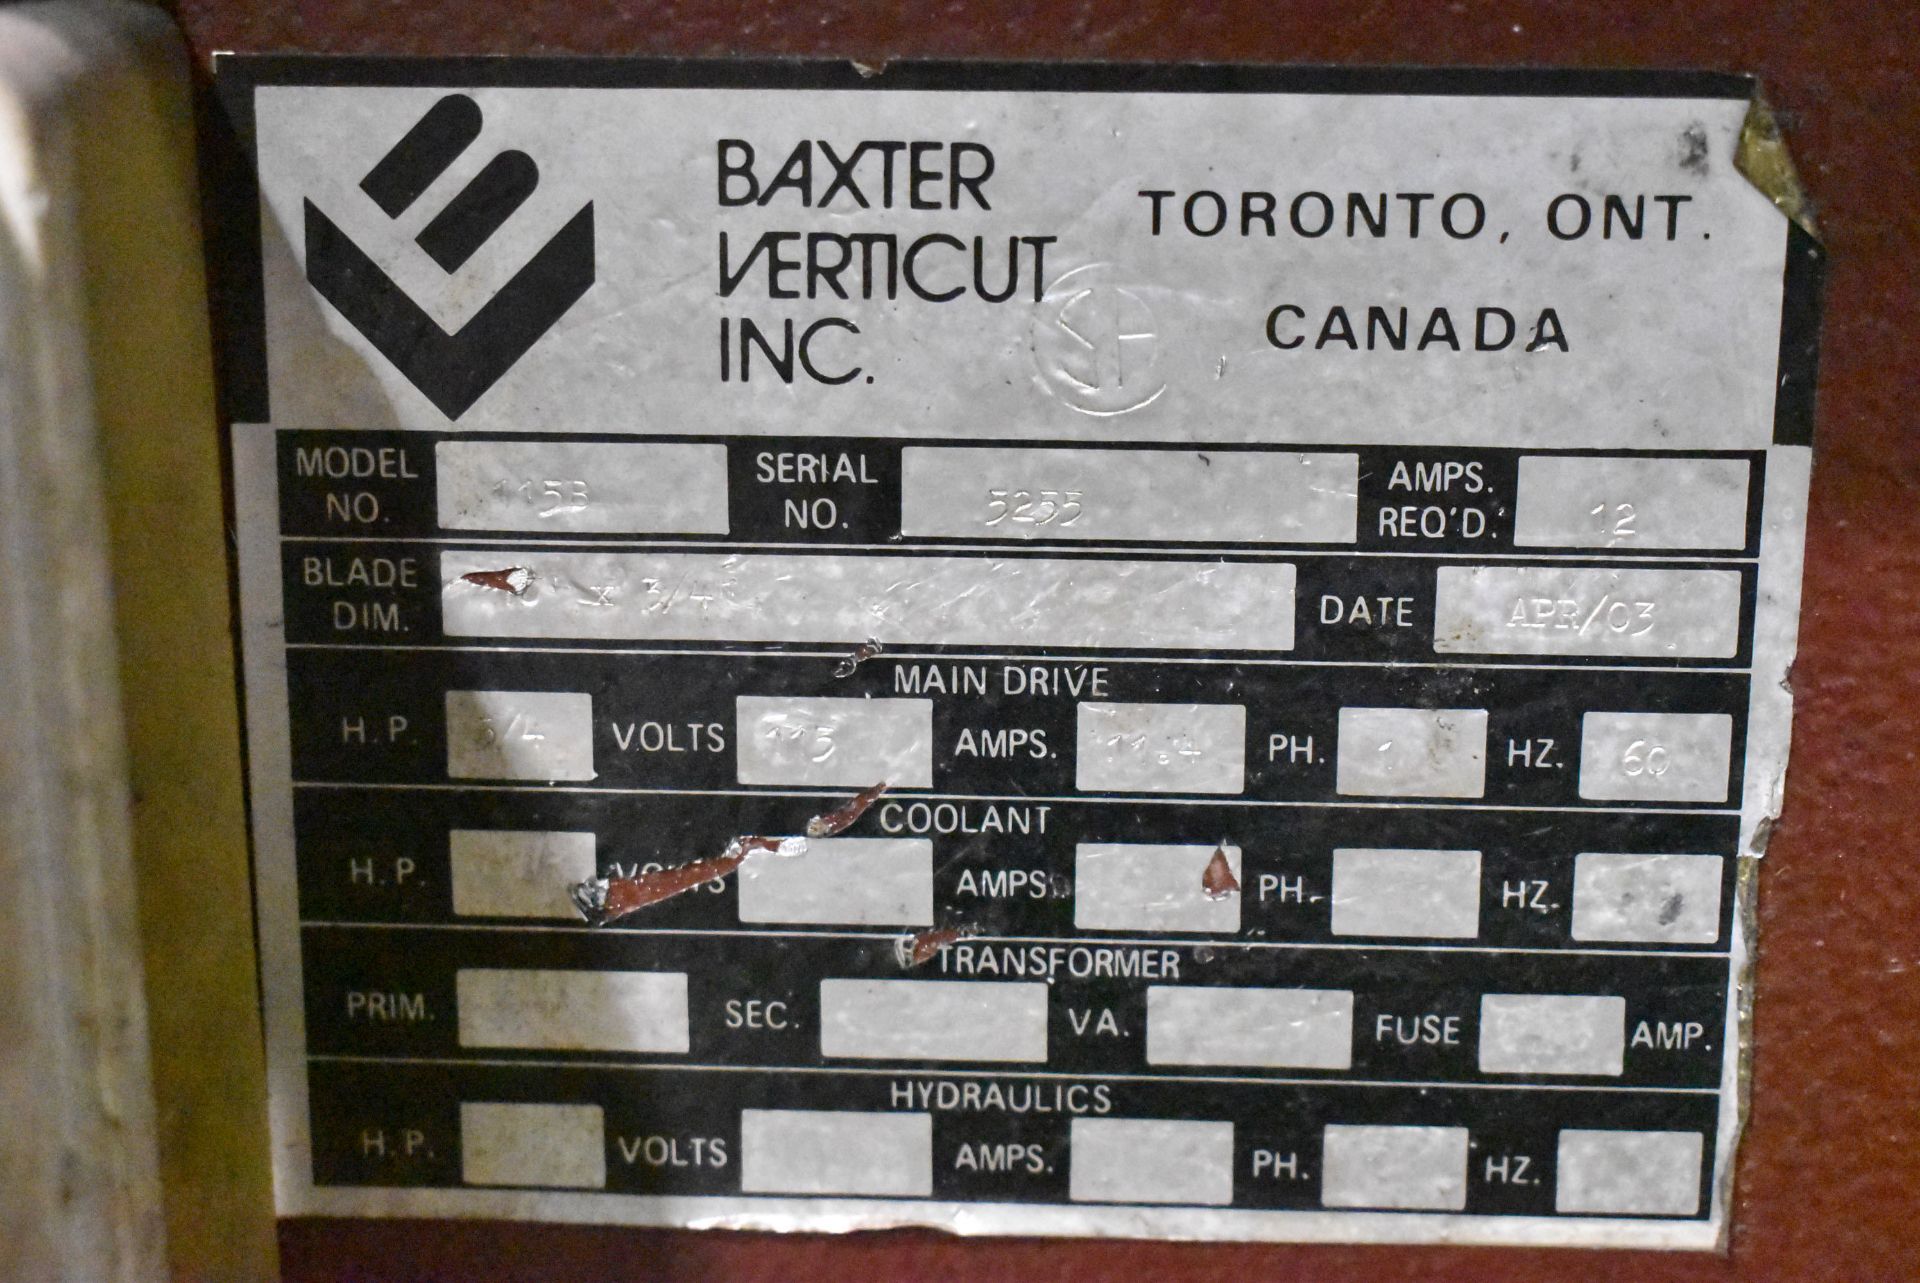 BAXTER VERTICUT MODEL 115B ROLL-IN VERTICAL BAND SAW WITH 18"X30" TABLE, 13" THROAT, 12" MAX. - Image 6 of 6